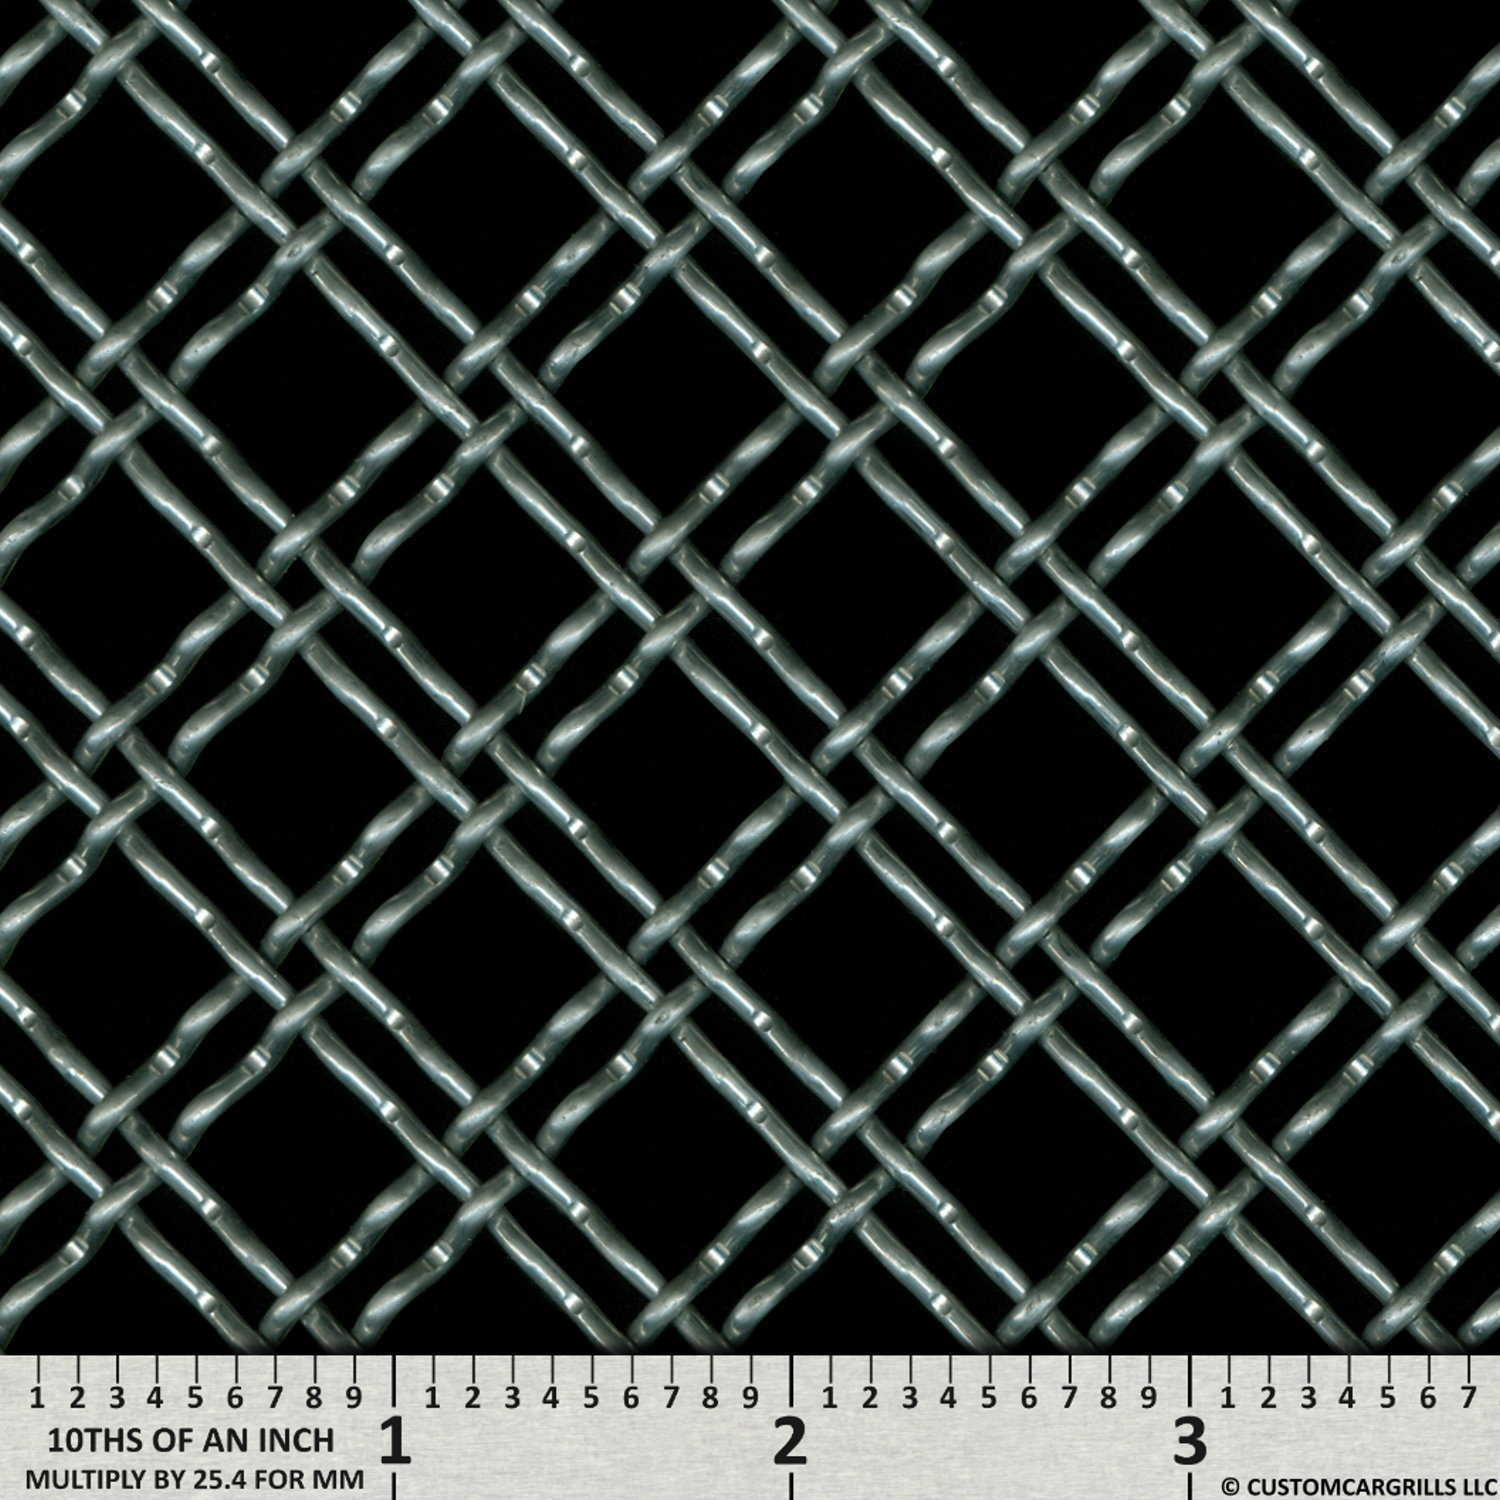 1/2 in. Double Diamond Woven Wire Grill Mesh Sheets by customcargrills